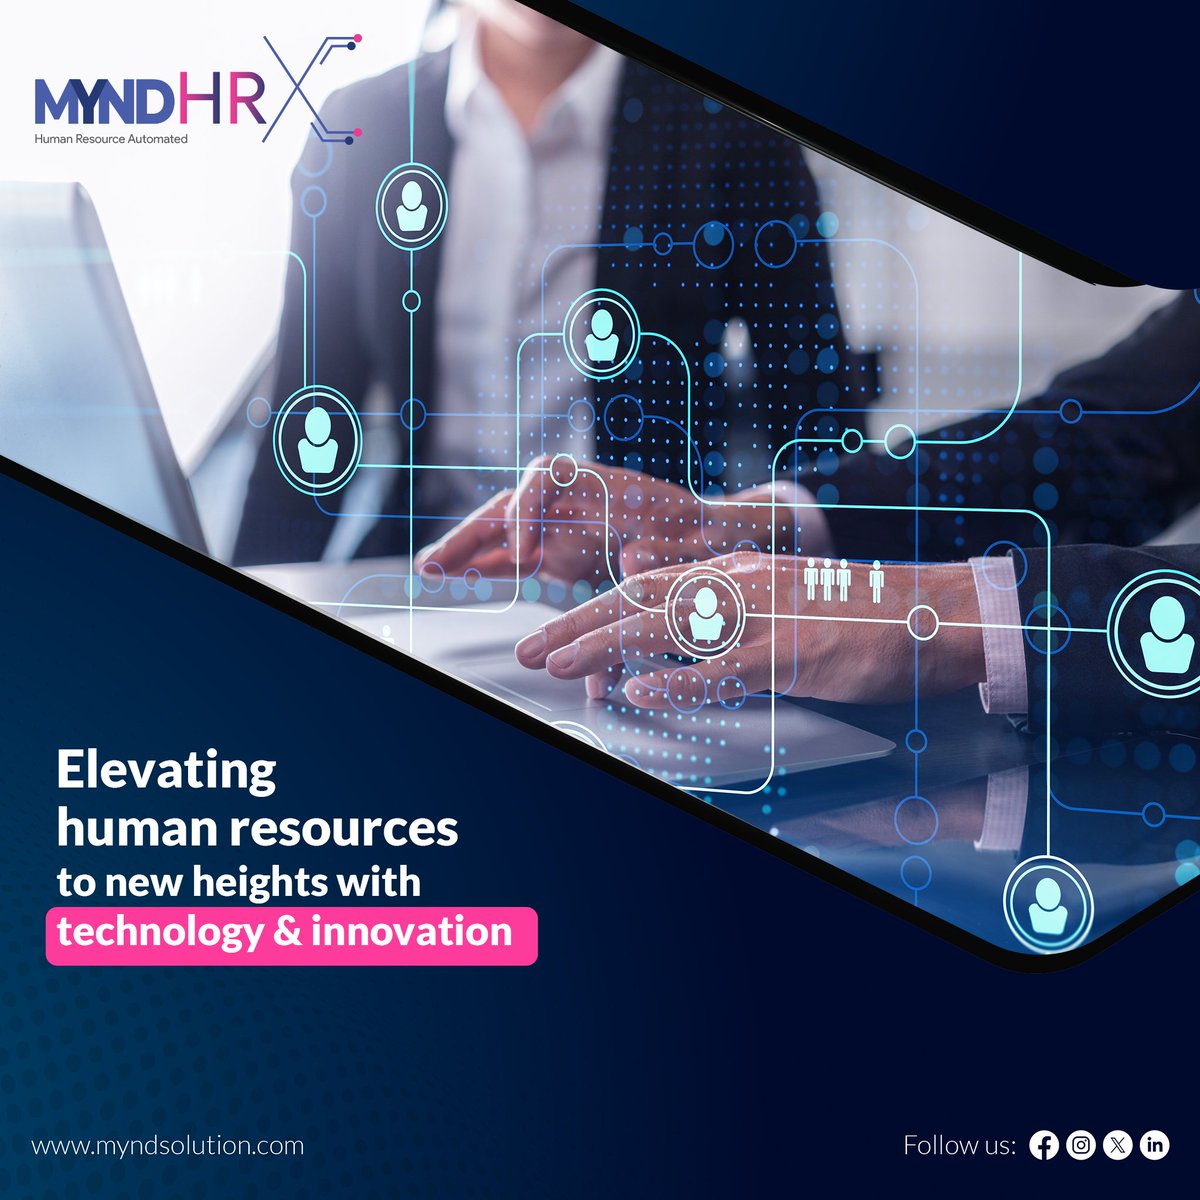 MyndHRX streamlines HR processes & empowers HR professionals to focus on strategic initiatives & employee engagement. 

#IntelligenceAutomated #MYNDHRX